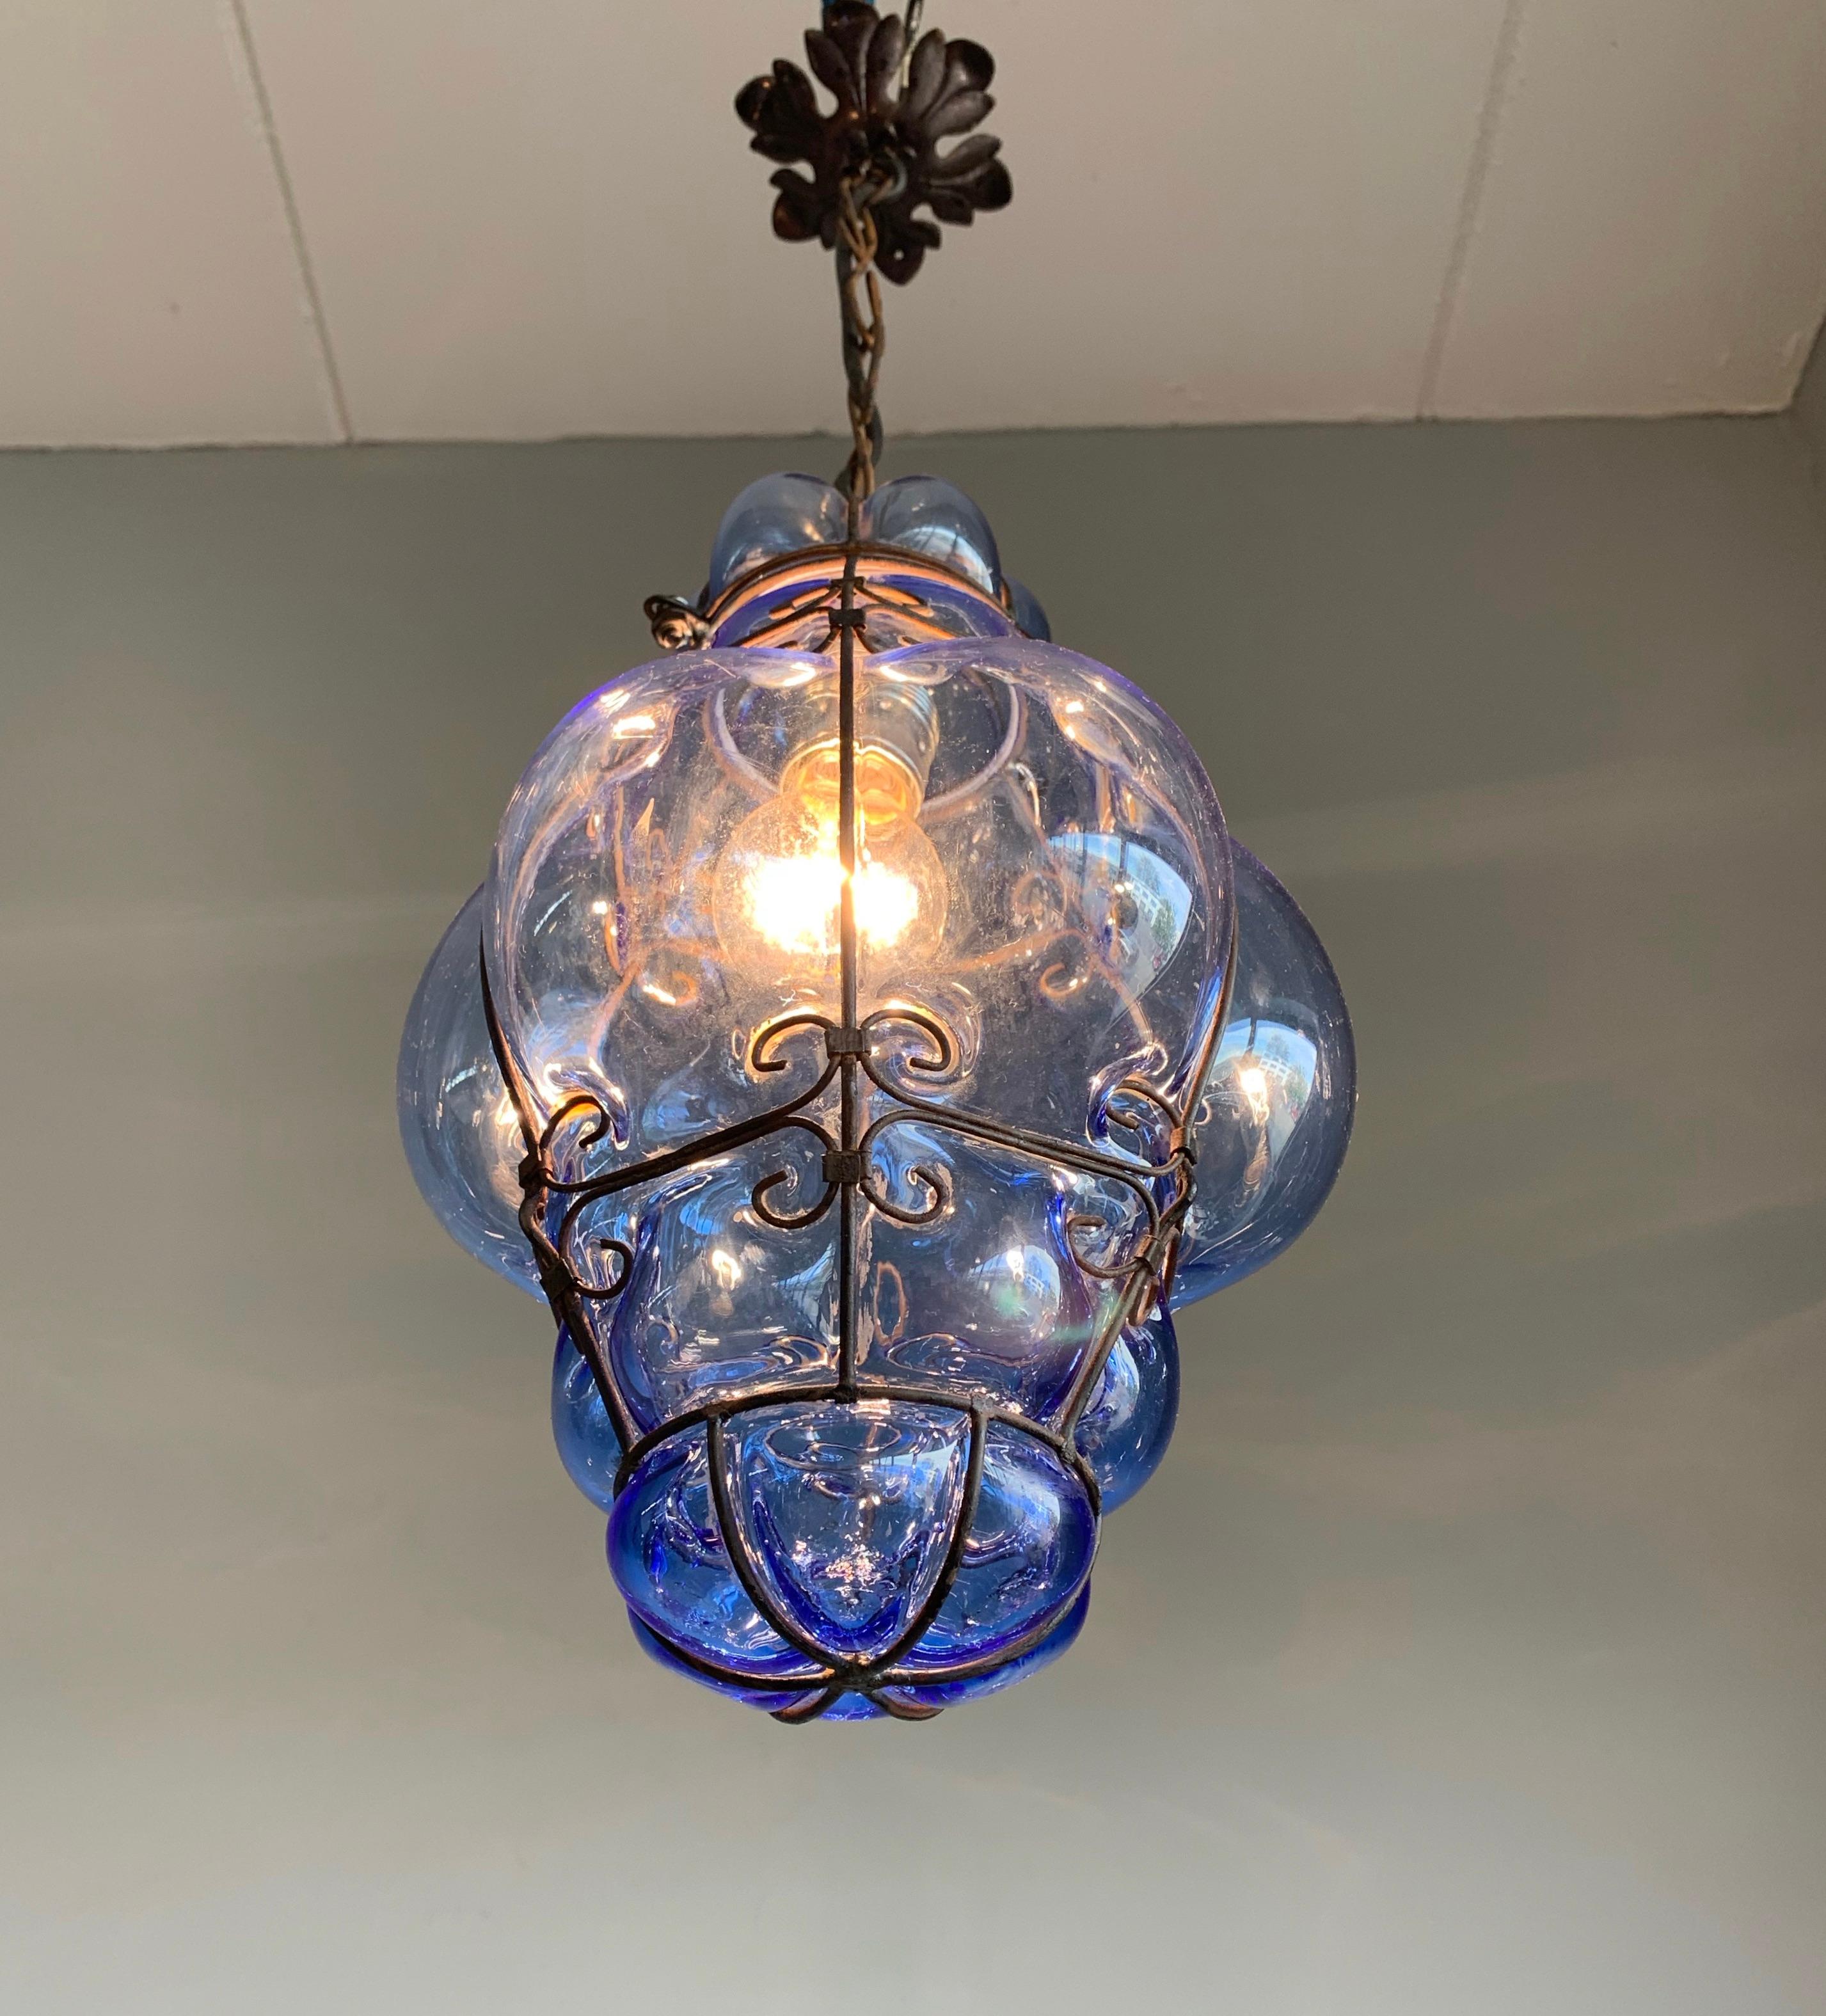 Italian Small Venetian Murano Pendant Light with Mouth Blown Blue Colored Glass in Frame